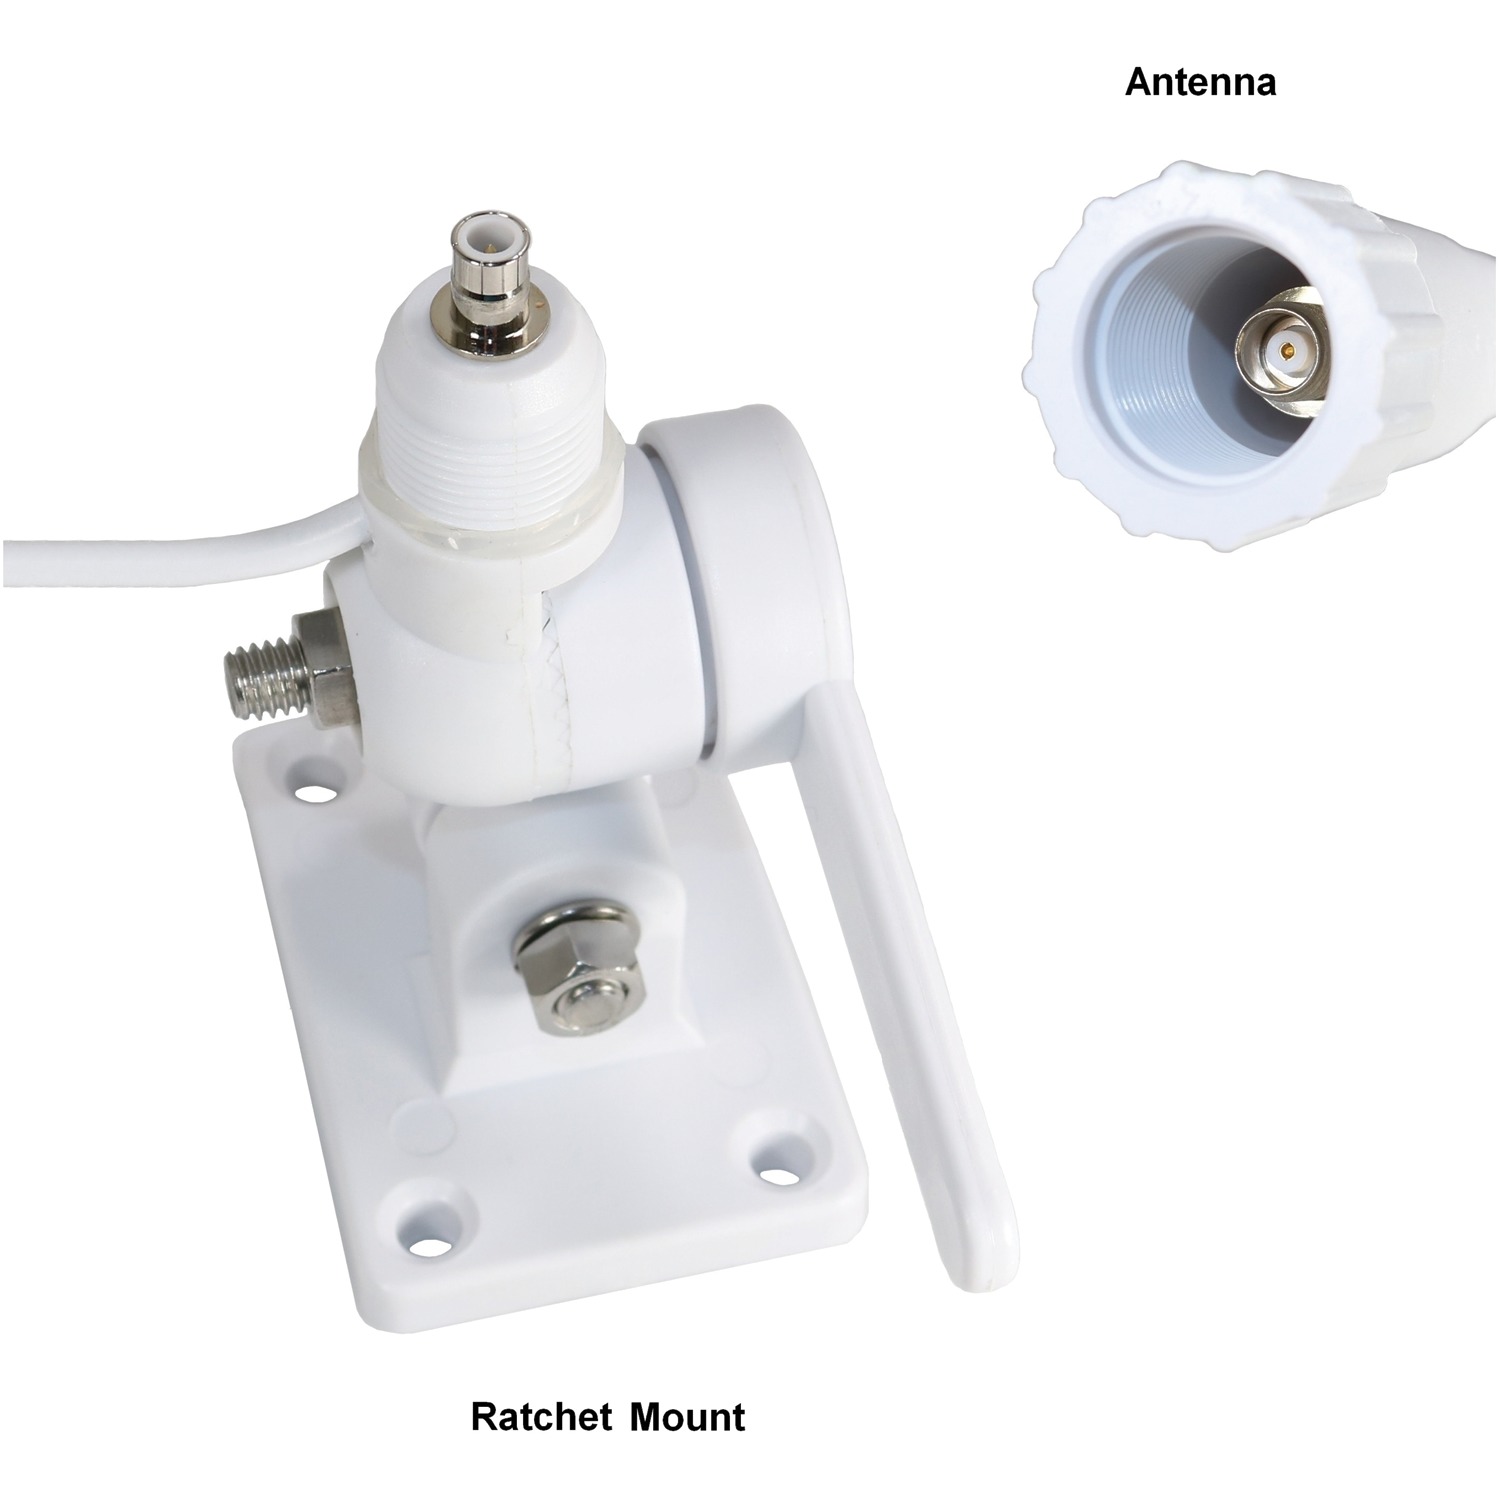 Tram 1616 5Ft VHF 3DBD Gain Marine Antenna With Cable Built-In To Ratchet Mount - image 4 of 5